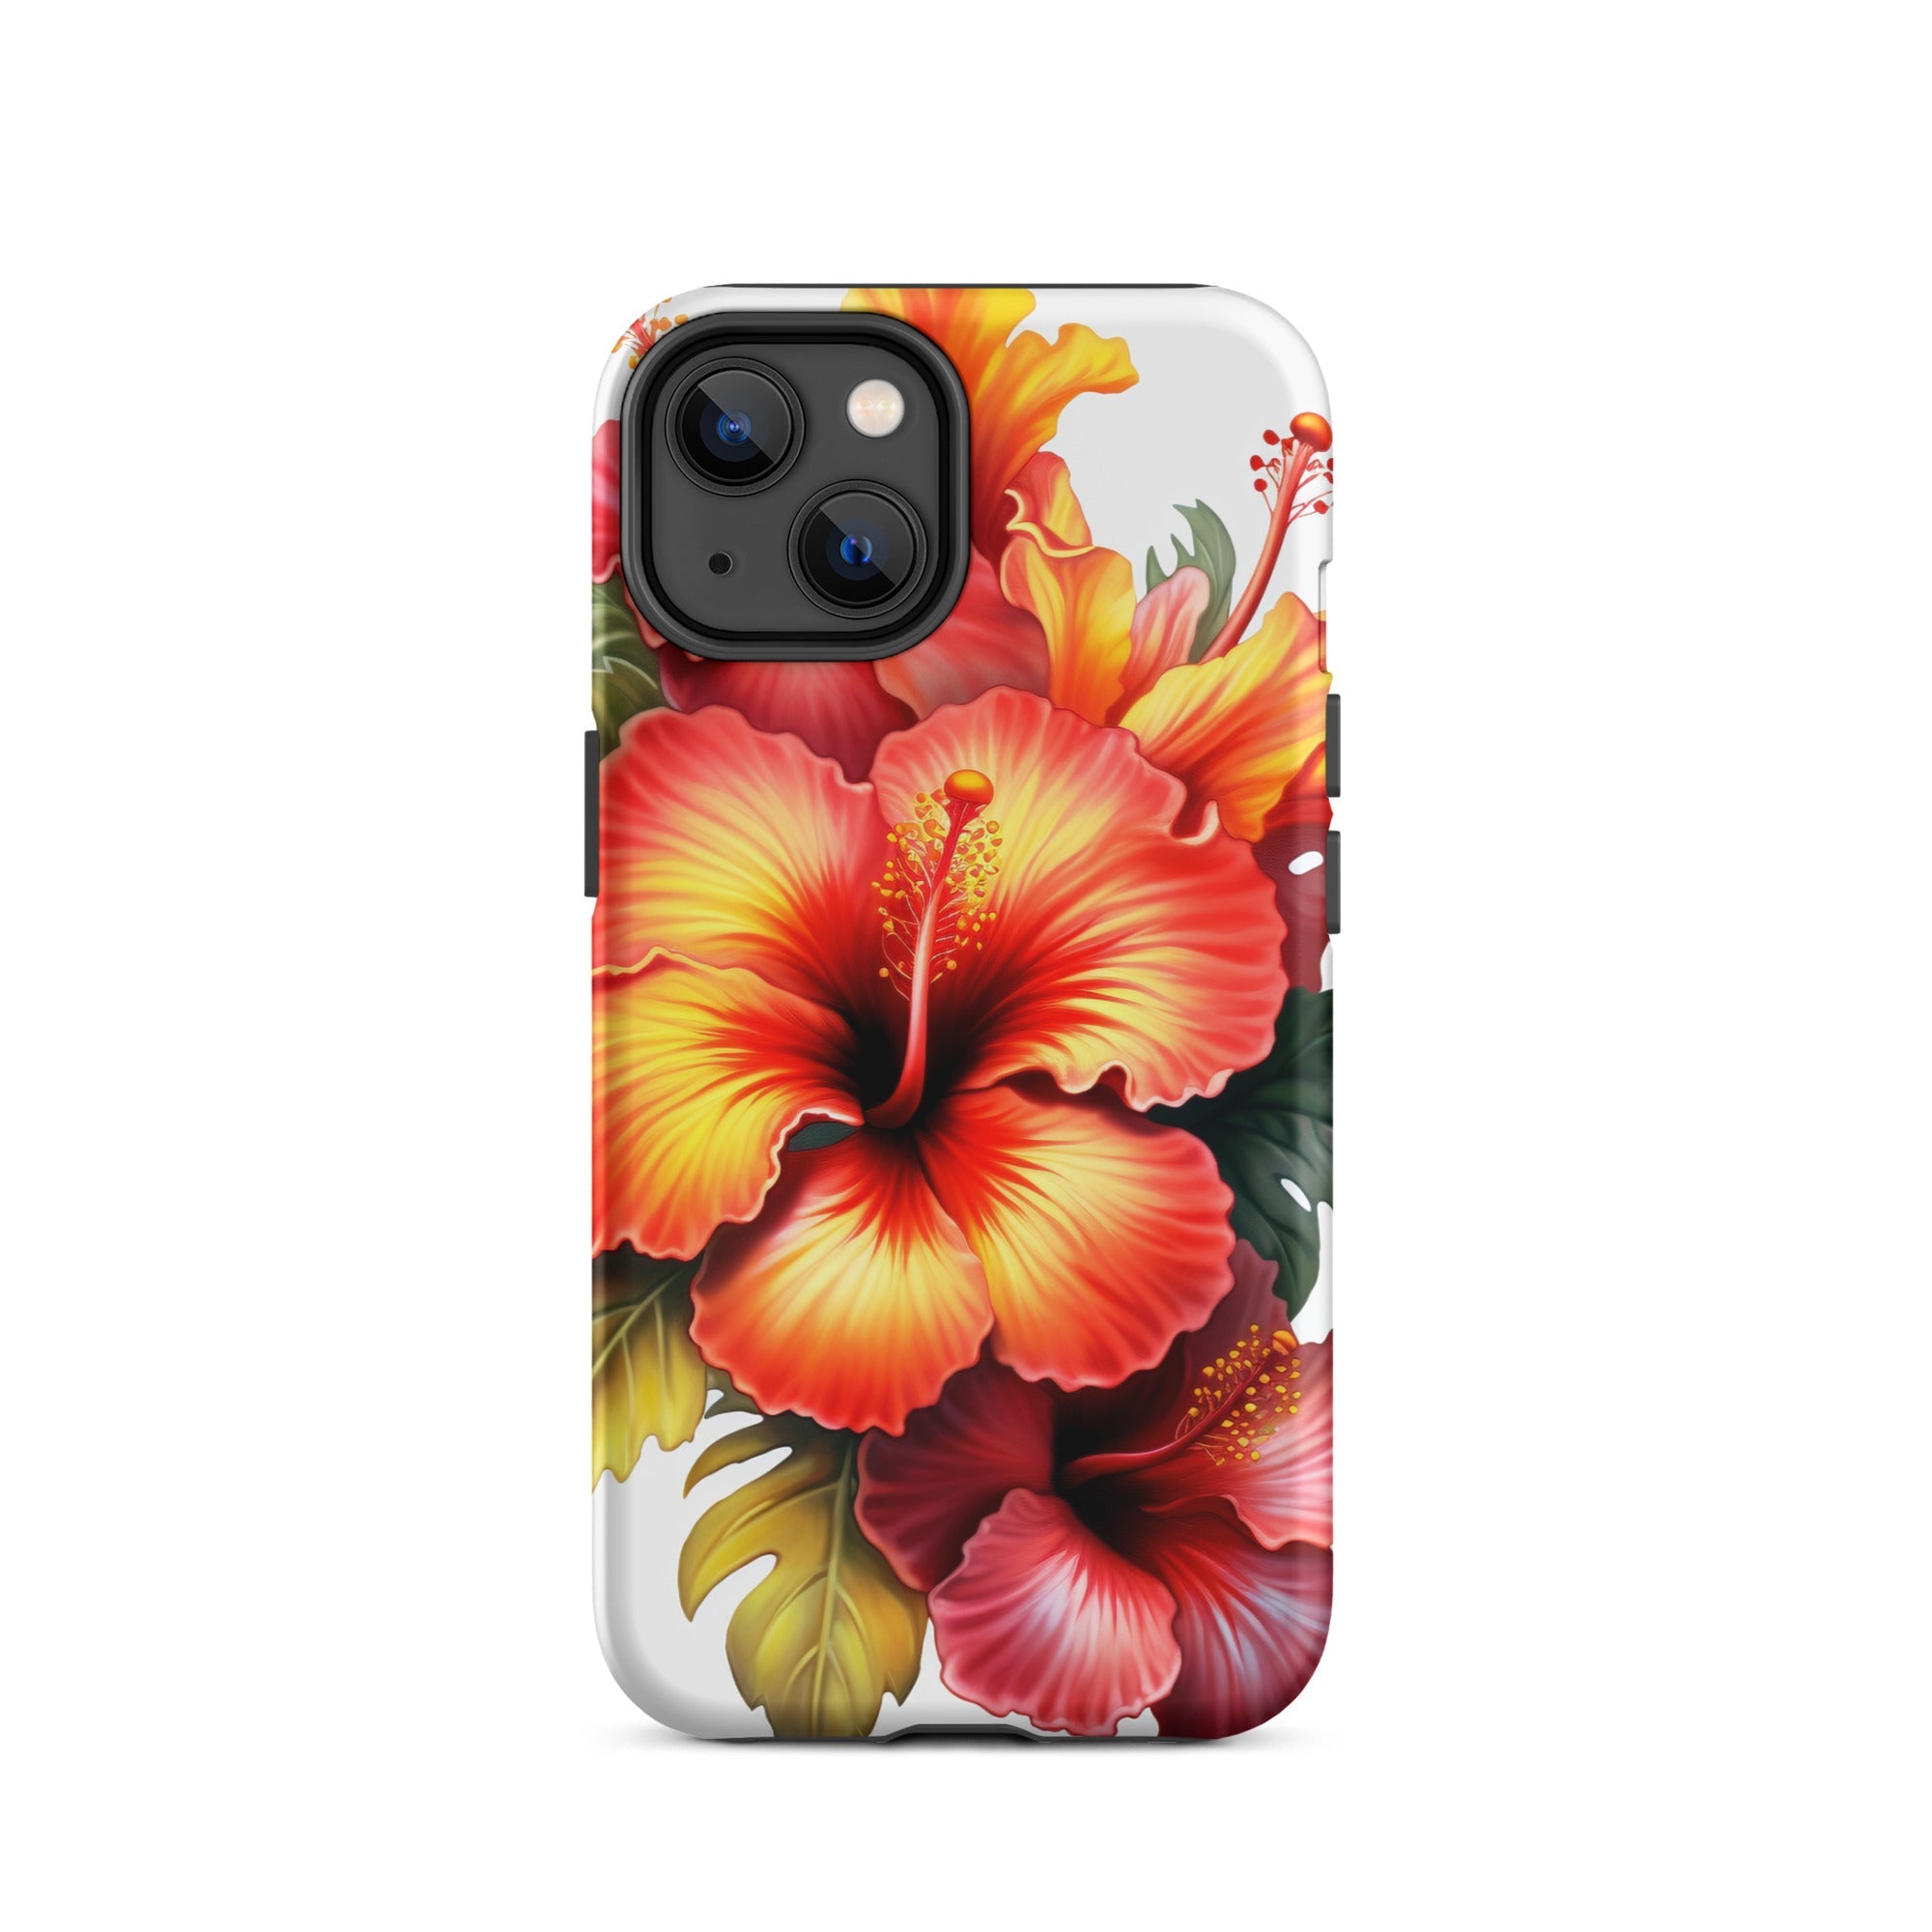 Hibiscus Flower iPhone Case by Visual Verse - Image 24